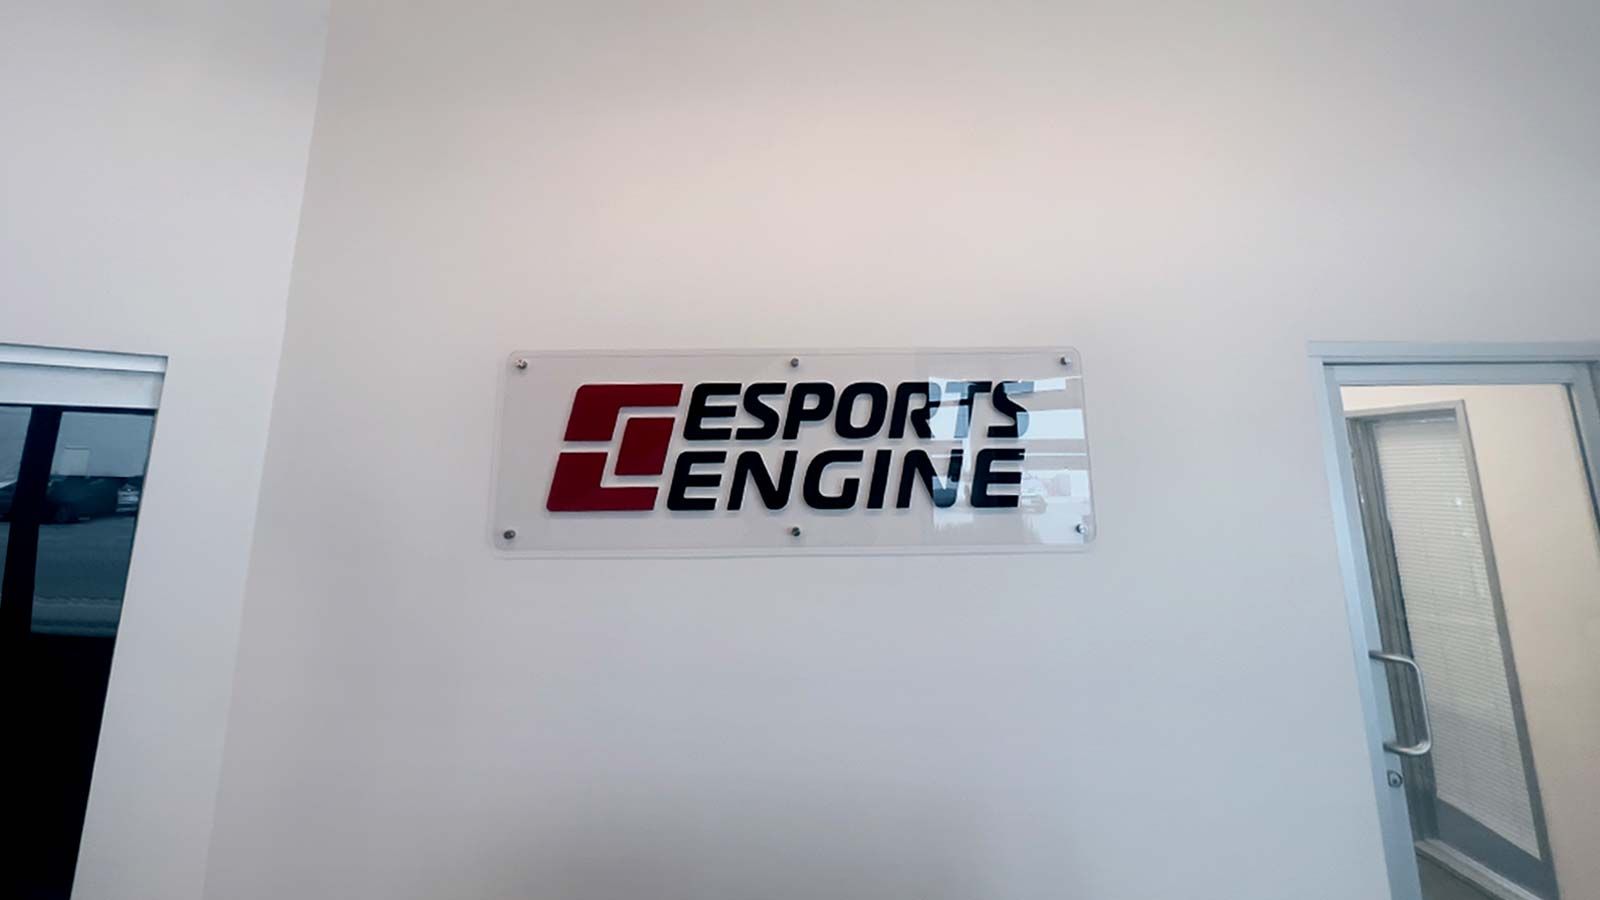 Esports Engine interior sign mounted on the wall